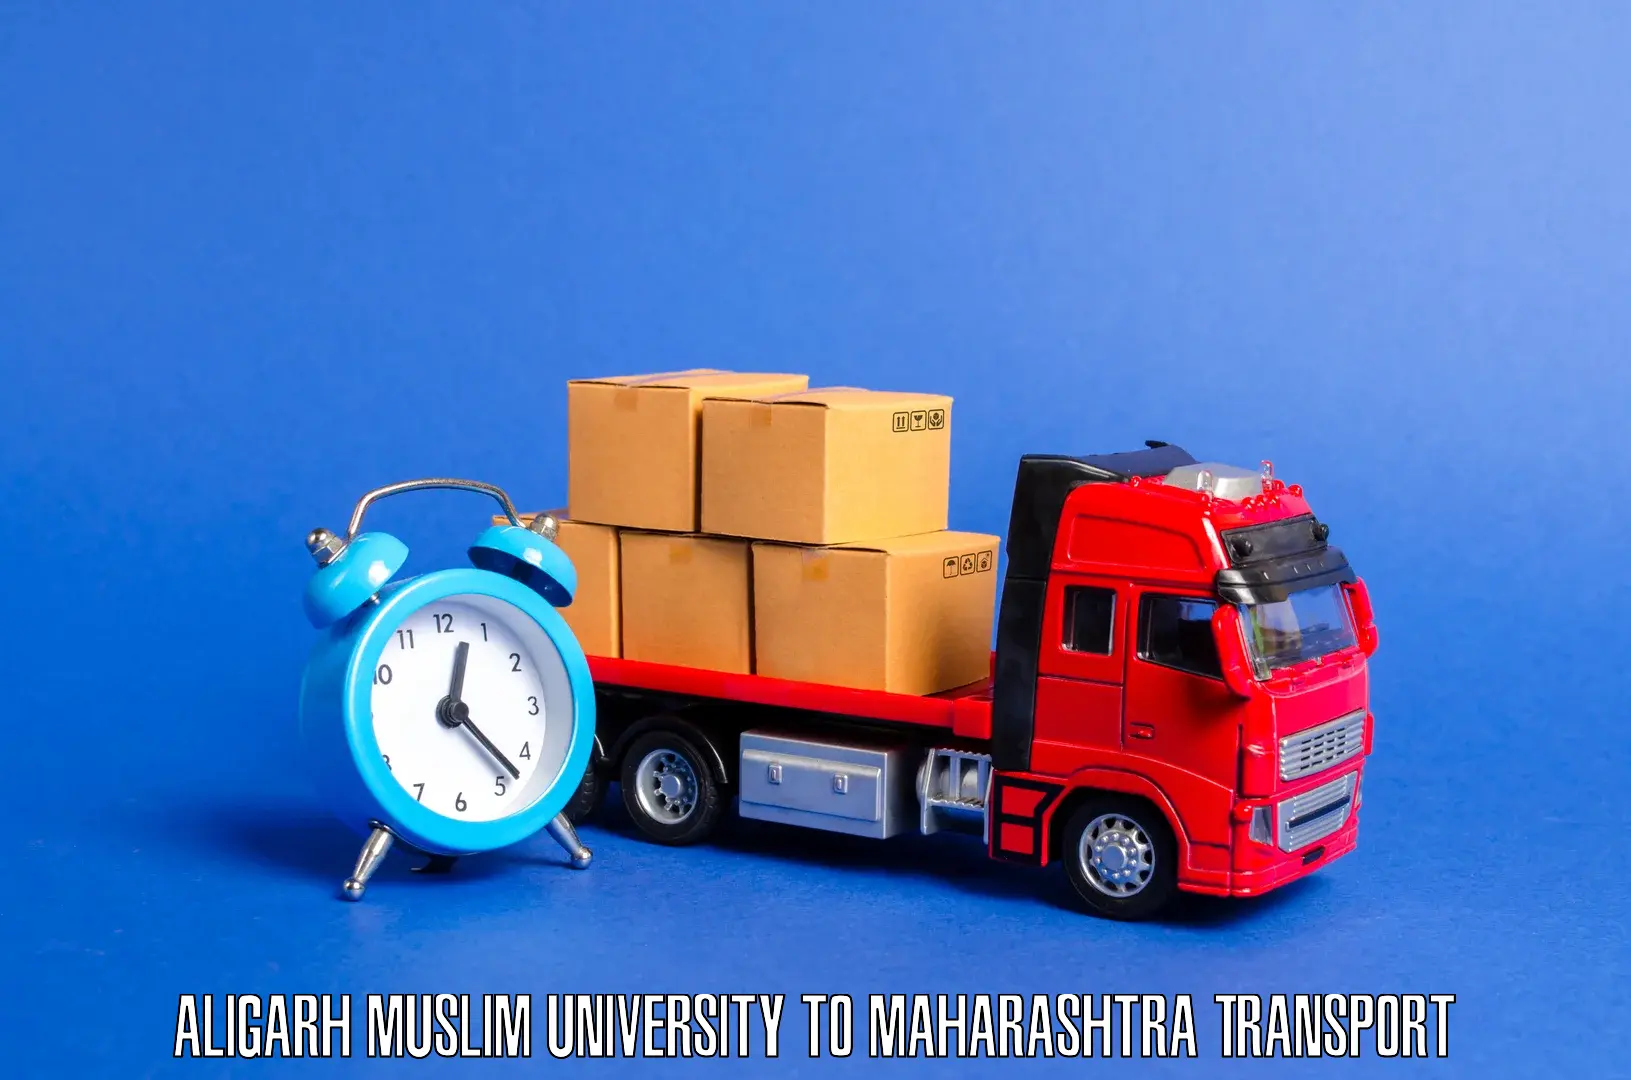 Transport bike from one state to another Aligarh Muslim University to Bambavade